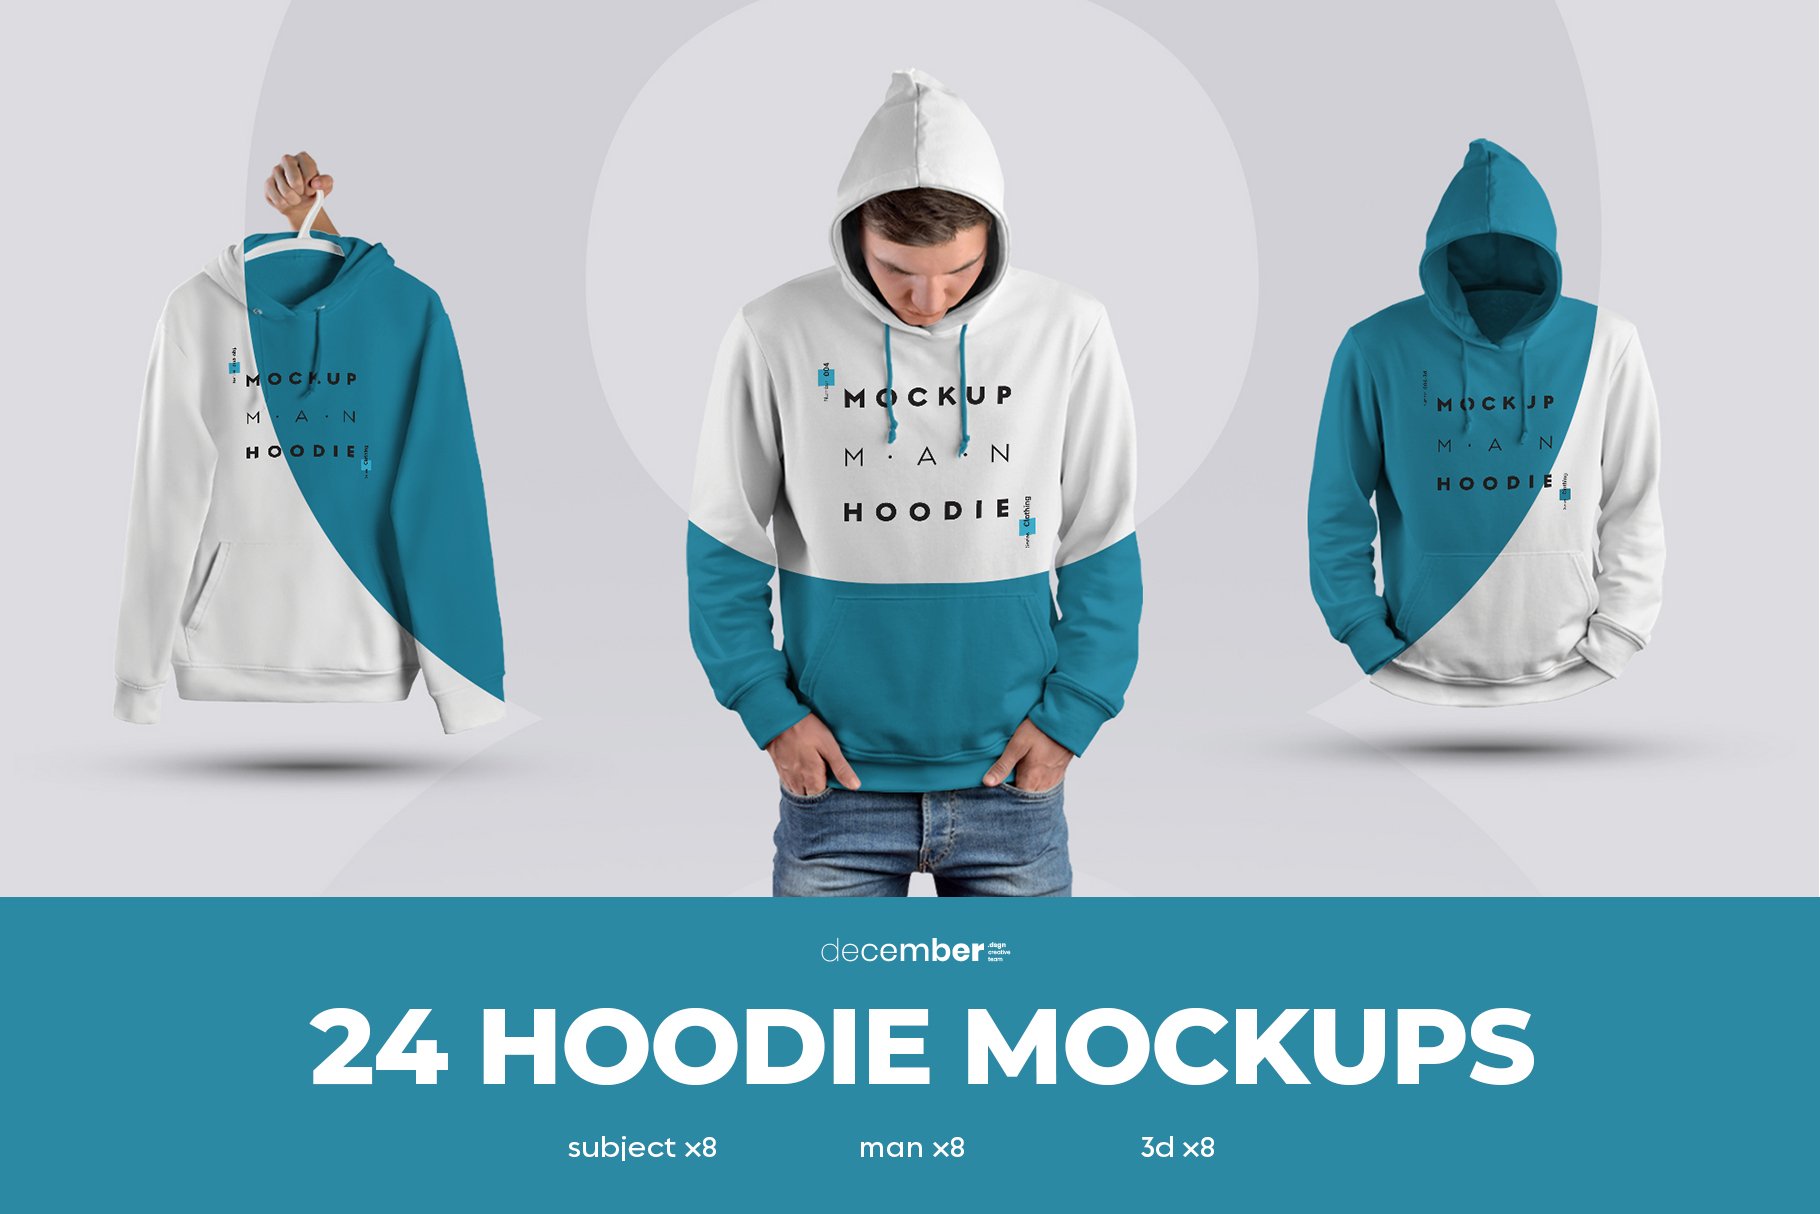 24 Hoodie Mockups ( Collection #2 ) cover image.